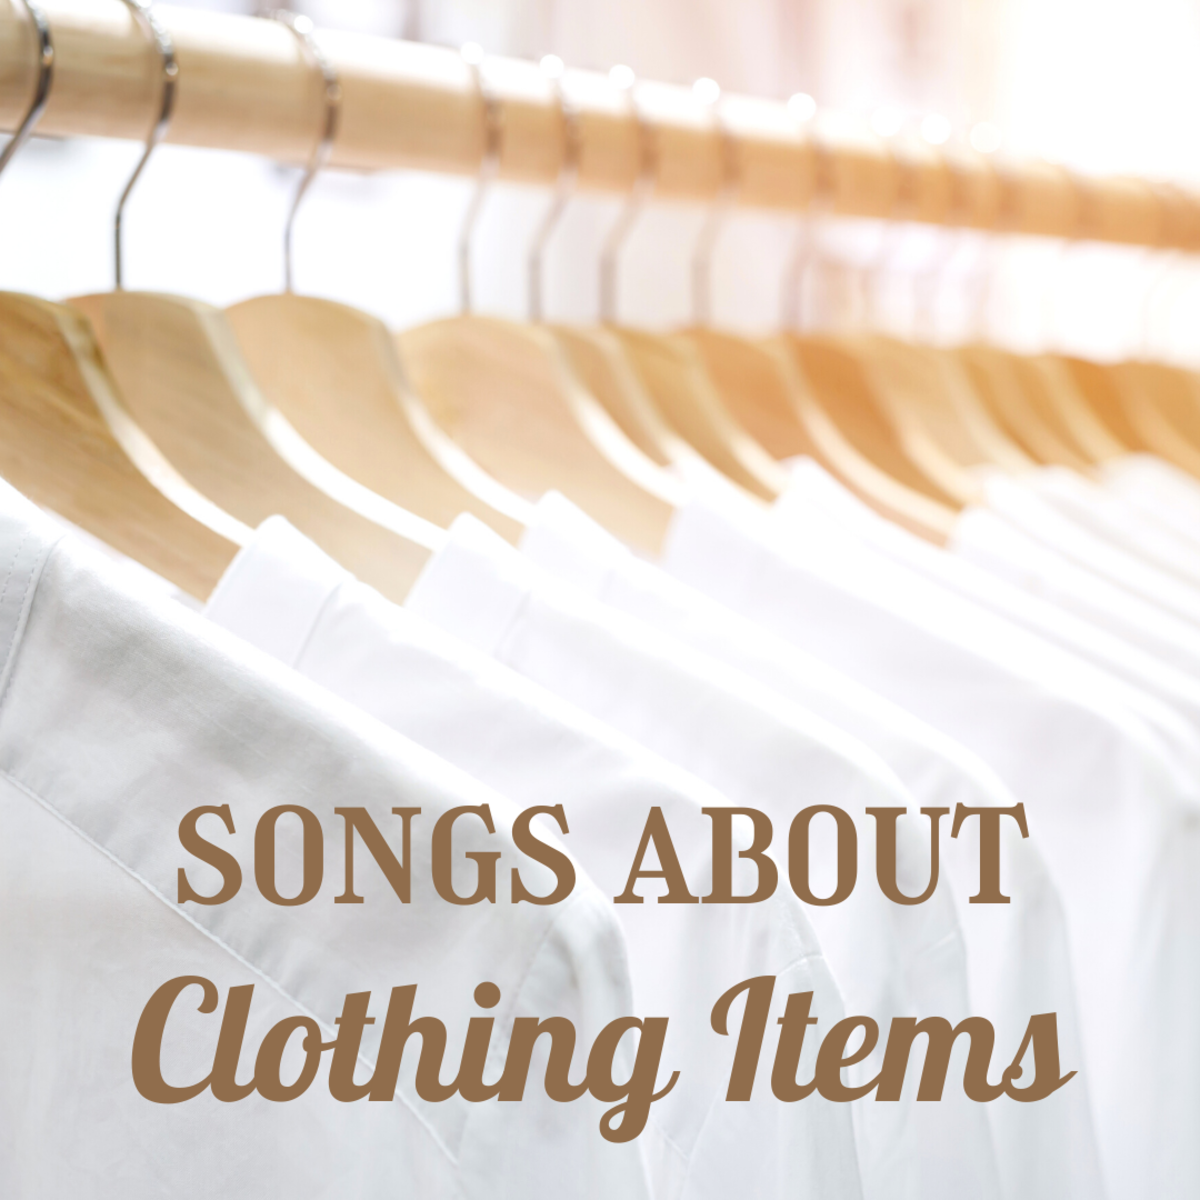 100 Best Songs With Clothing Items in the Title